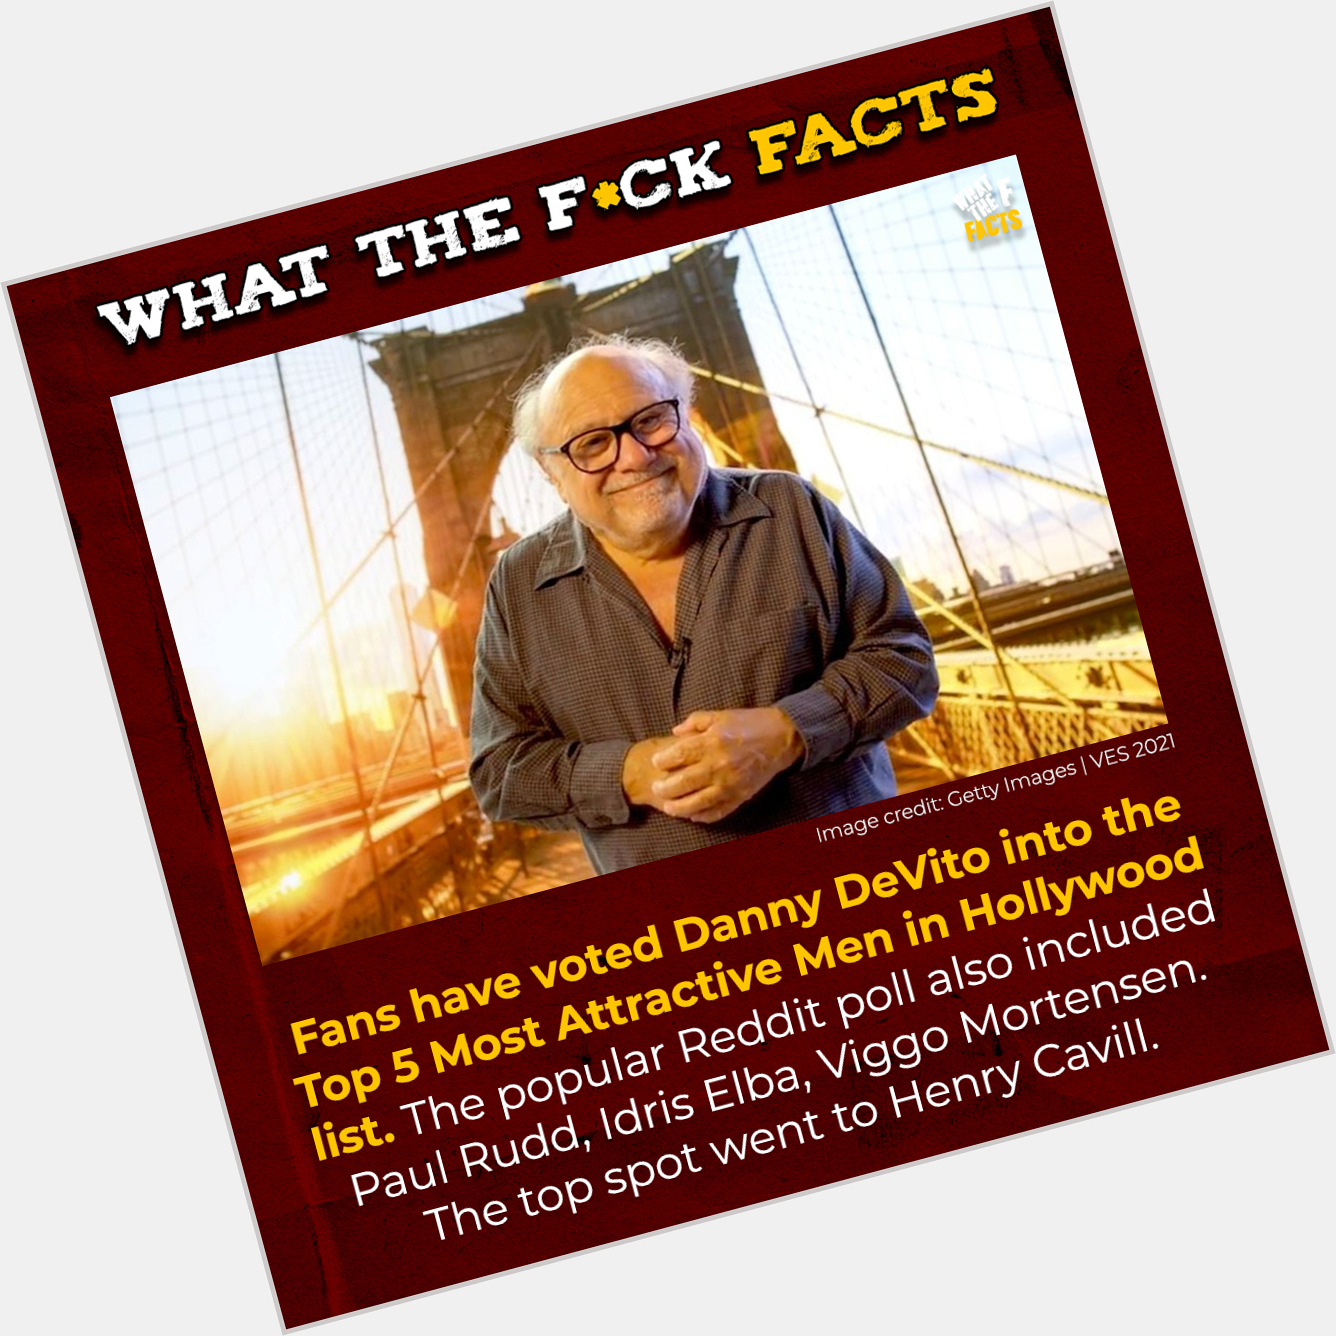 Happy birthday, Danny DeVito!

Here are some facts about him you might not have known:  